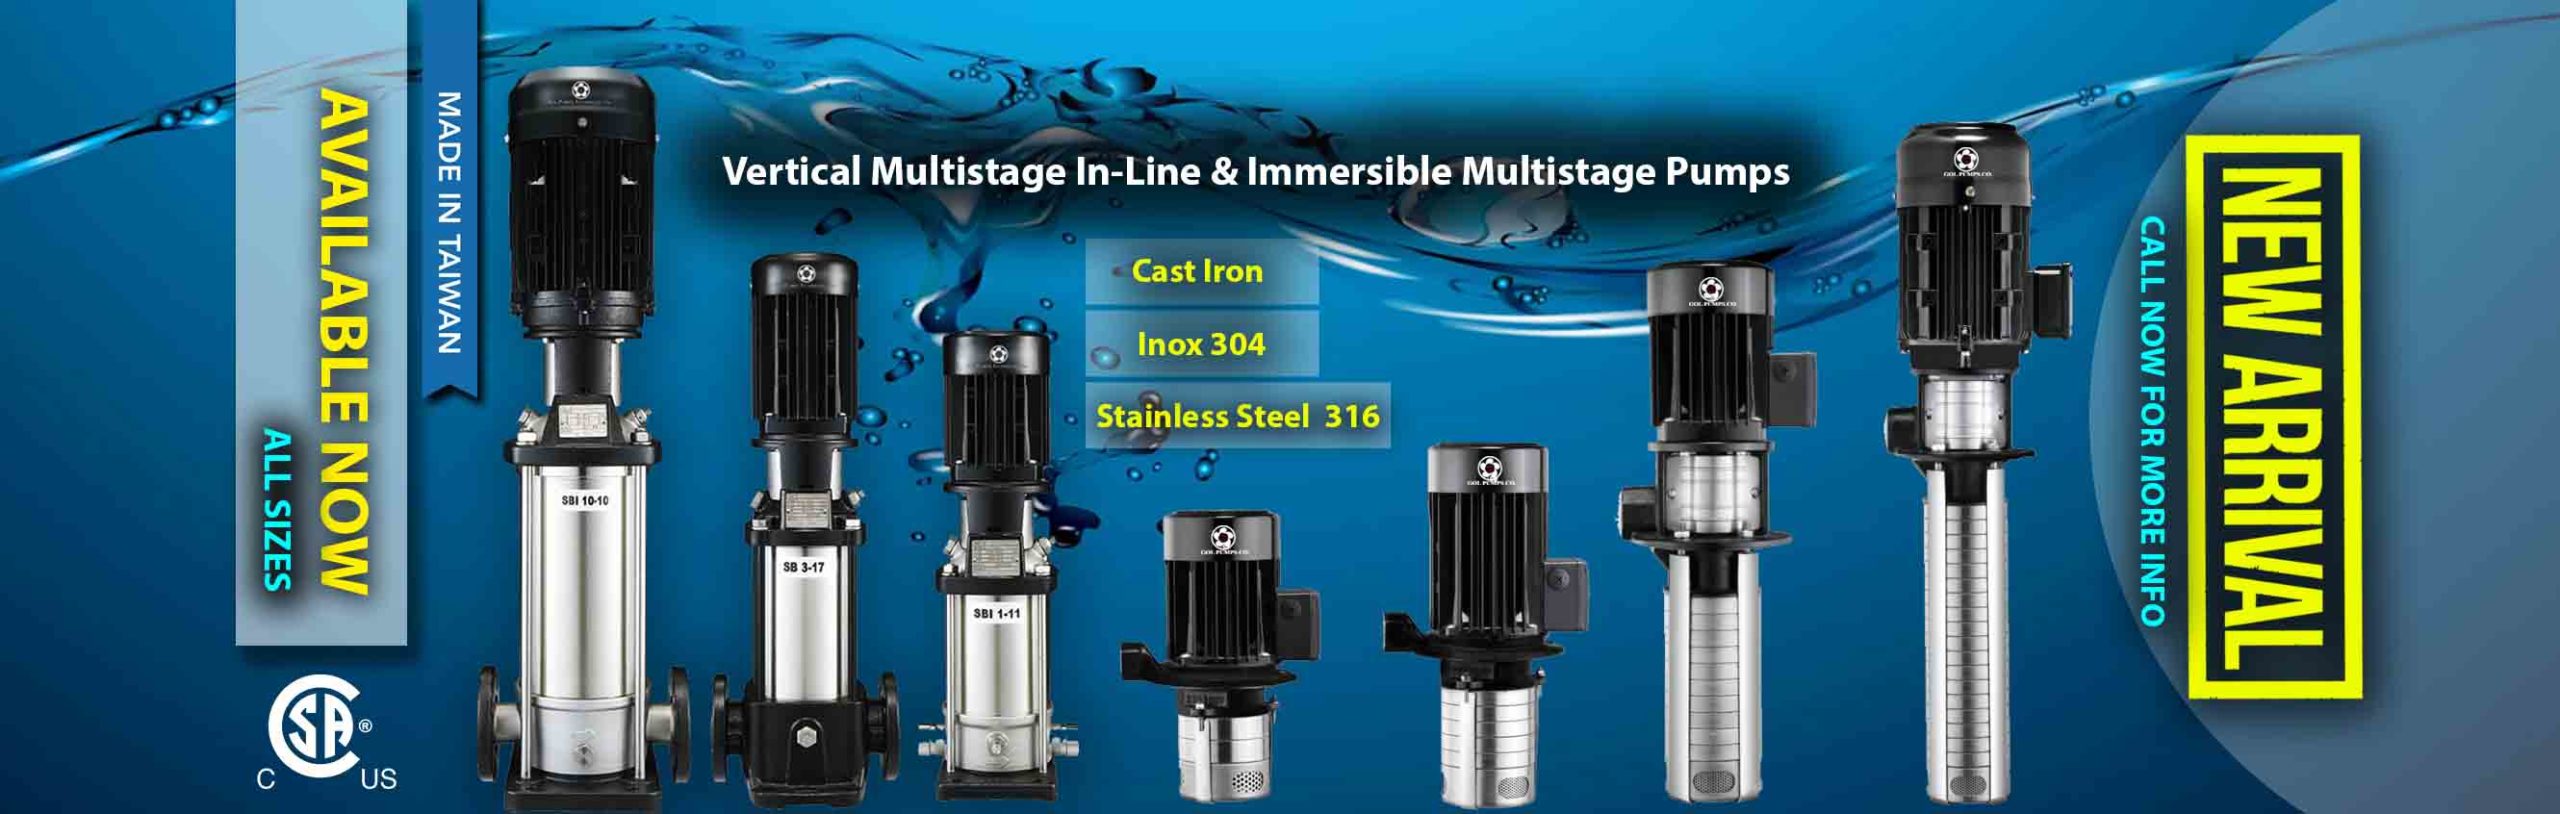 Gol Pumps-Pumpdepot-Multistage Vertical Pumps and immersible pumps